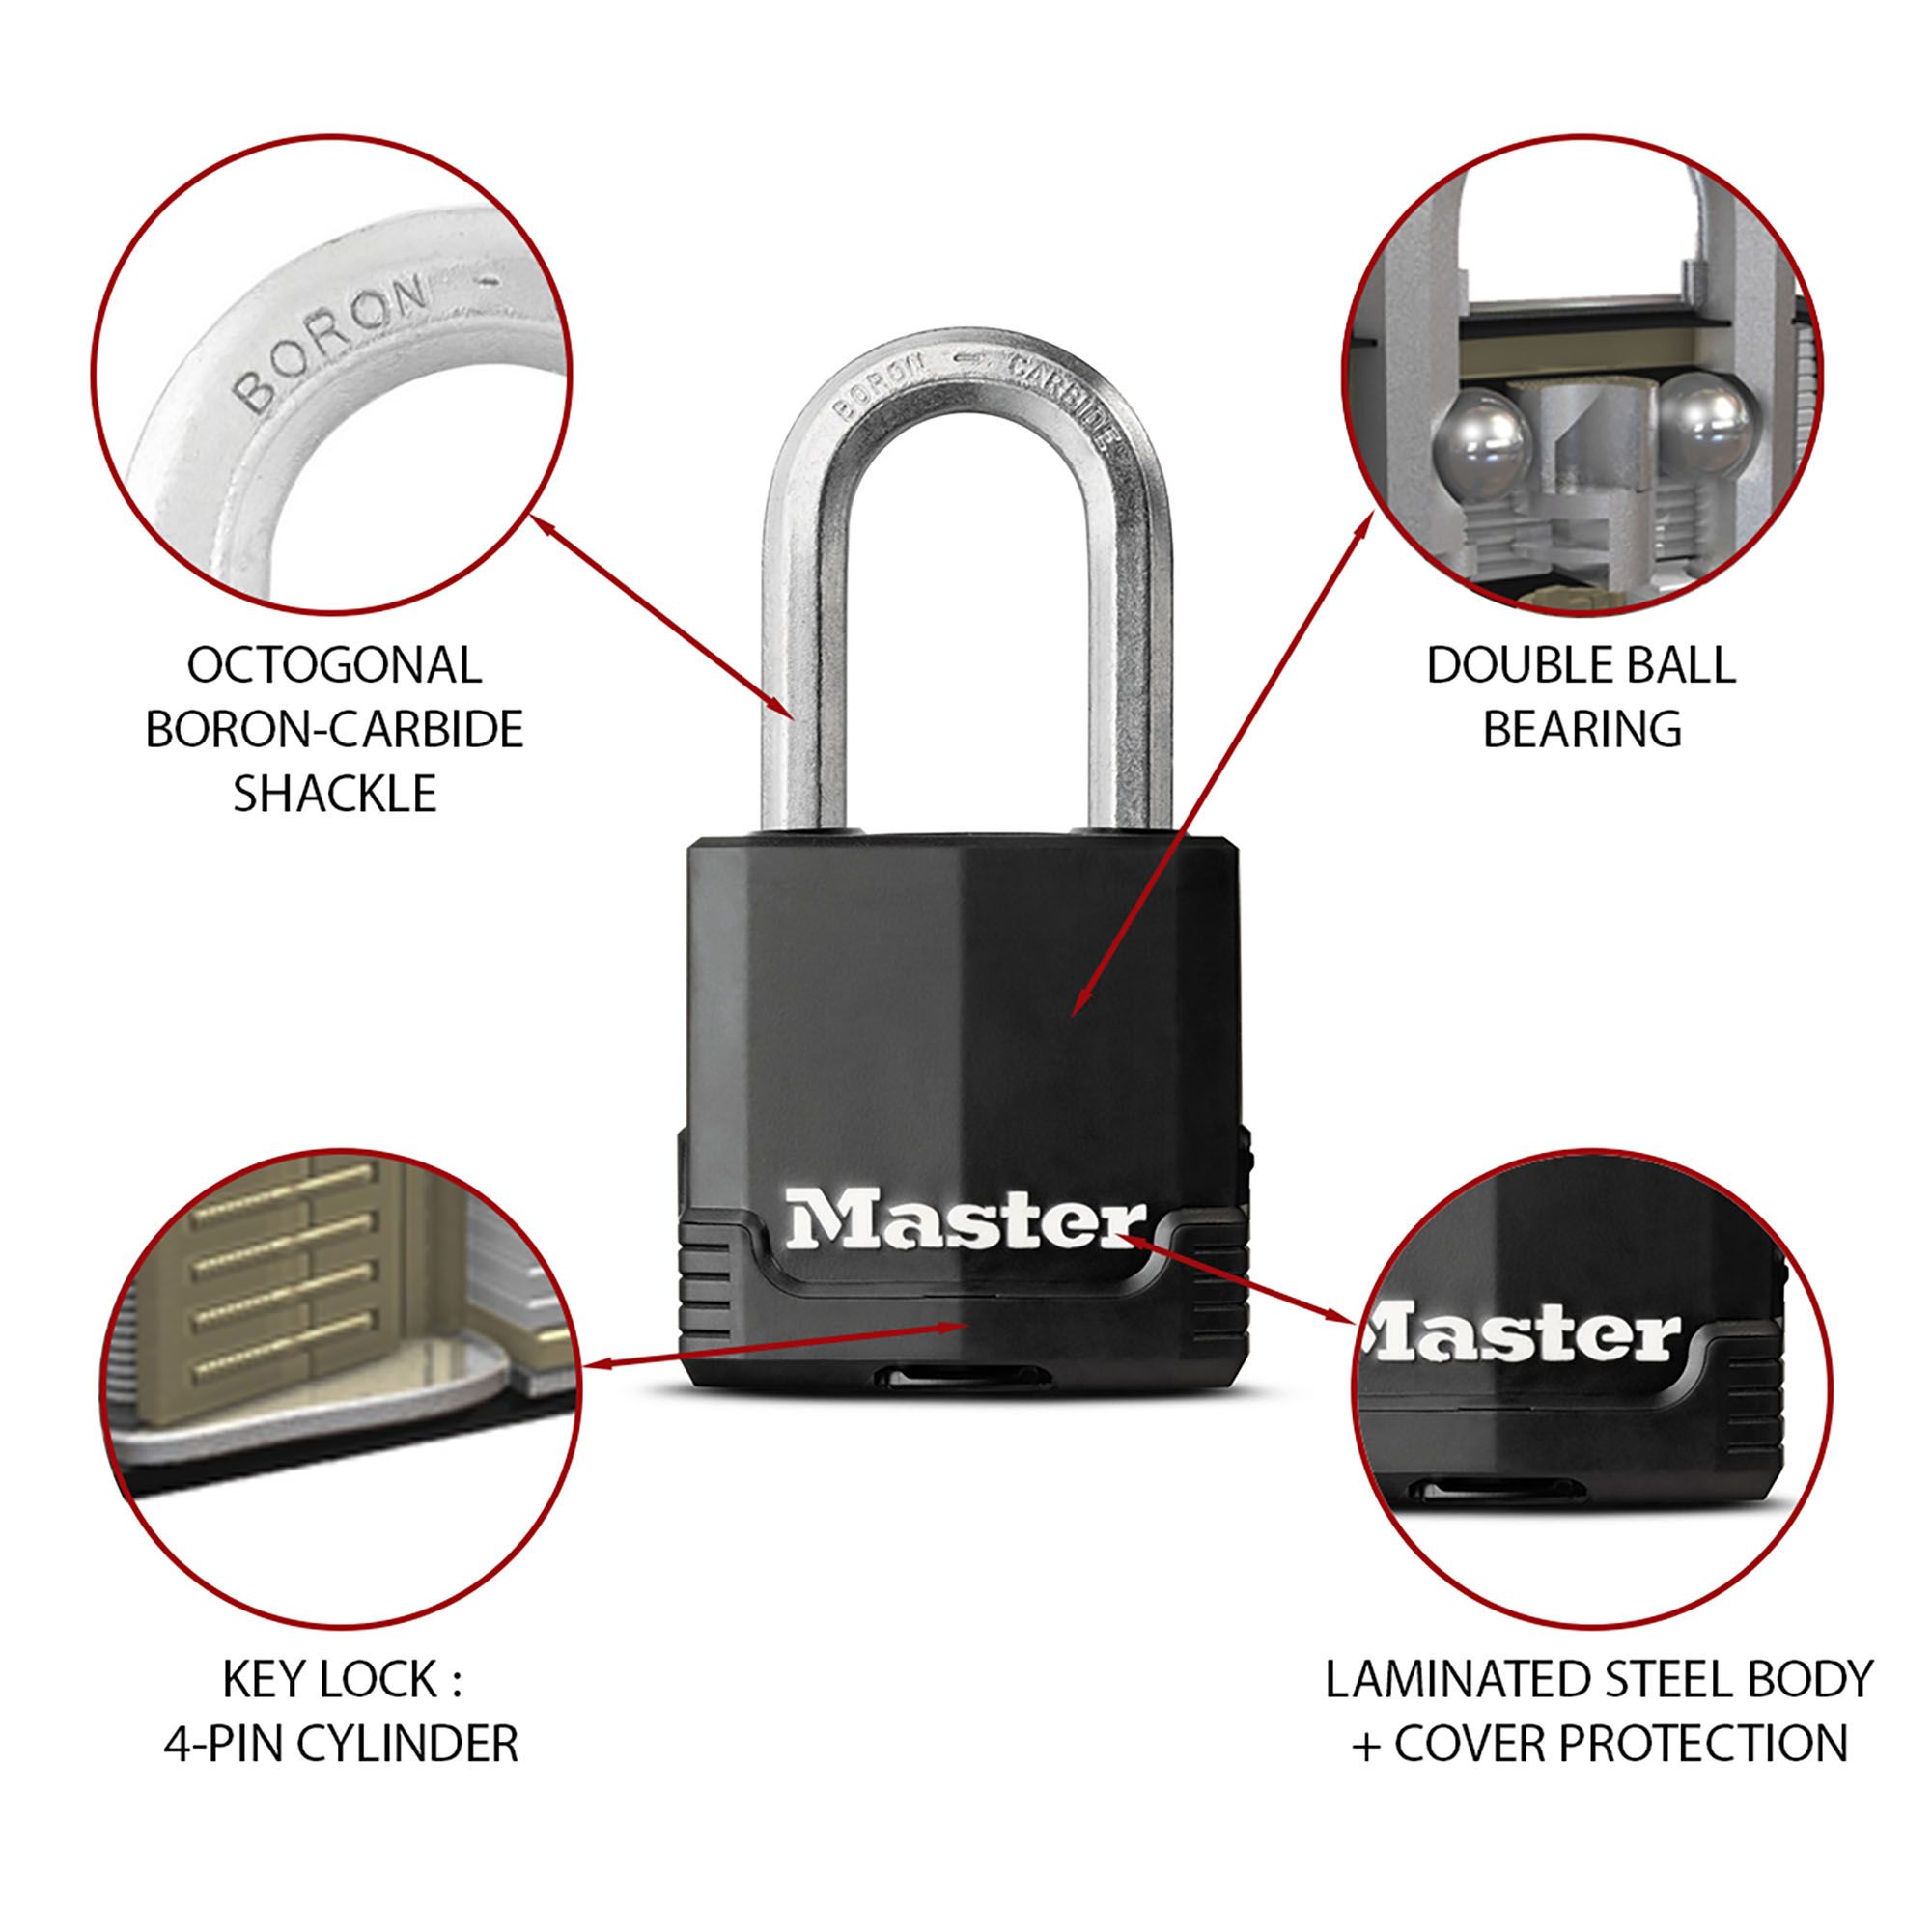 Master Lock Excell Heavy duty Laminated Black 4 pin tumbler cylinder Open shackle Padlock (W)49mm